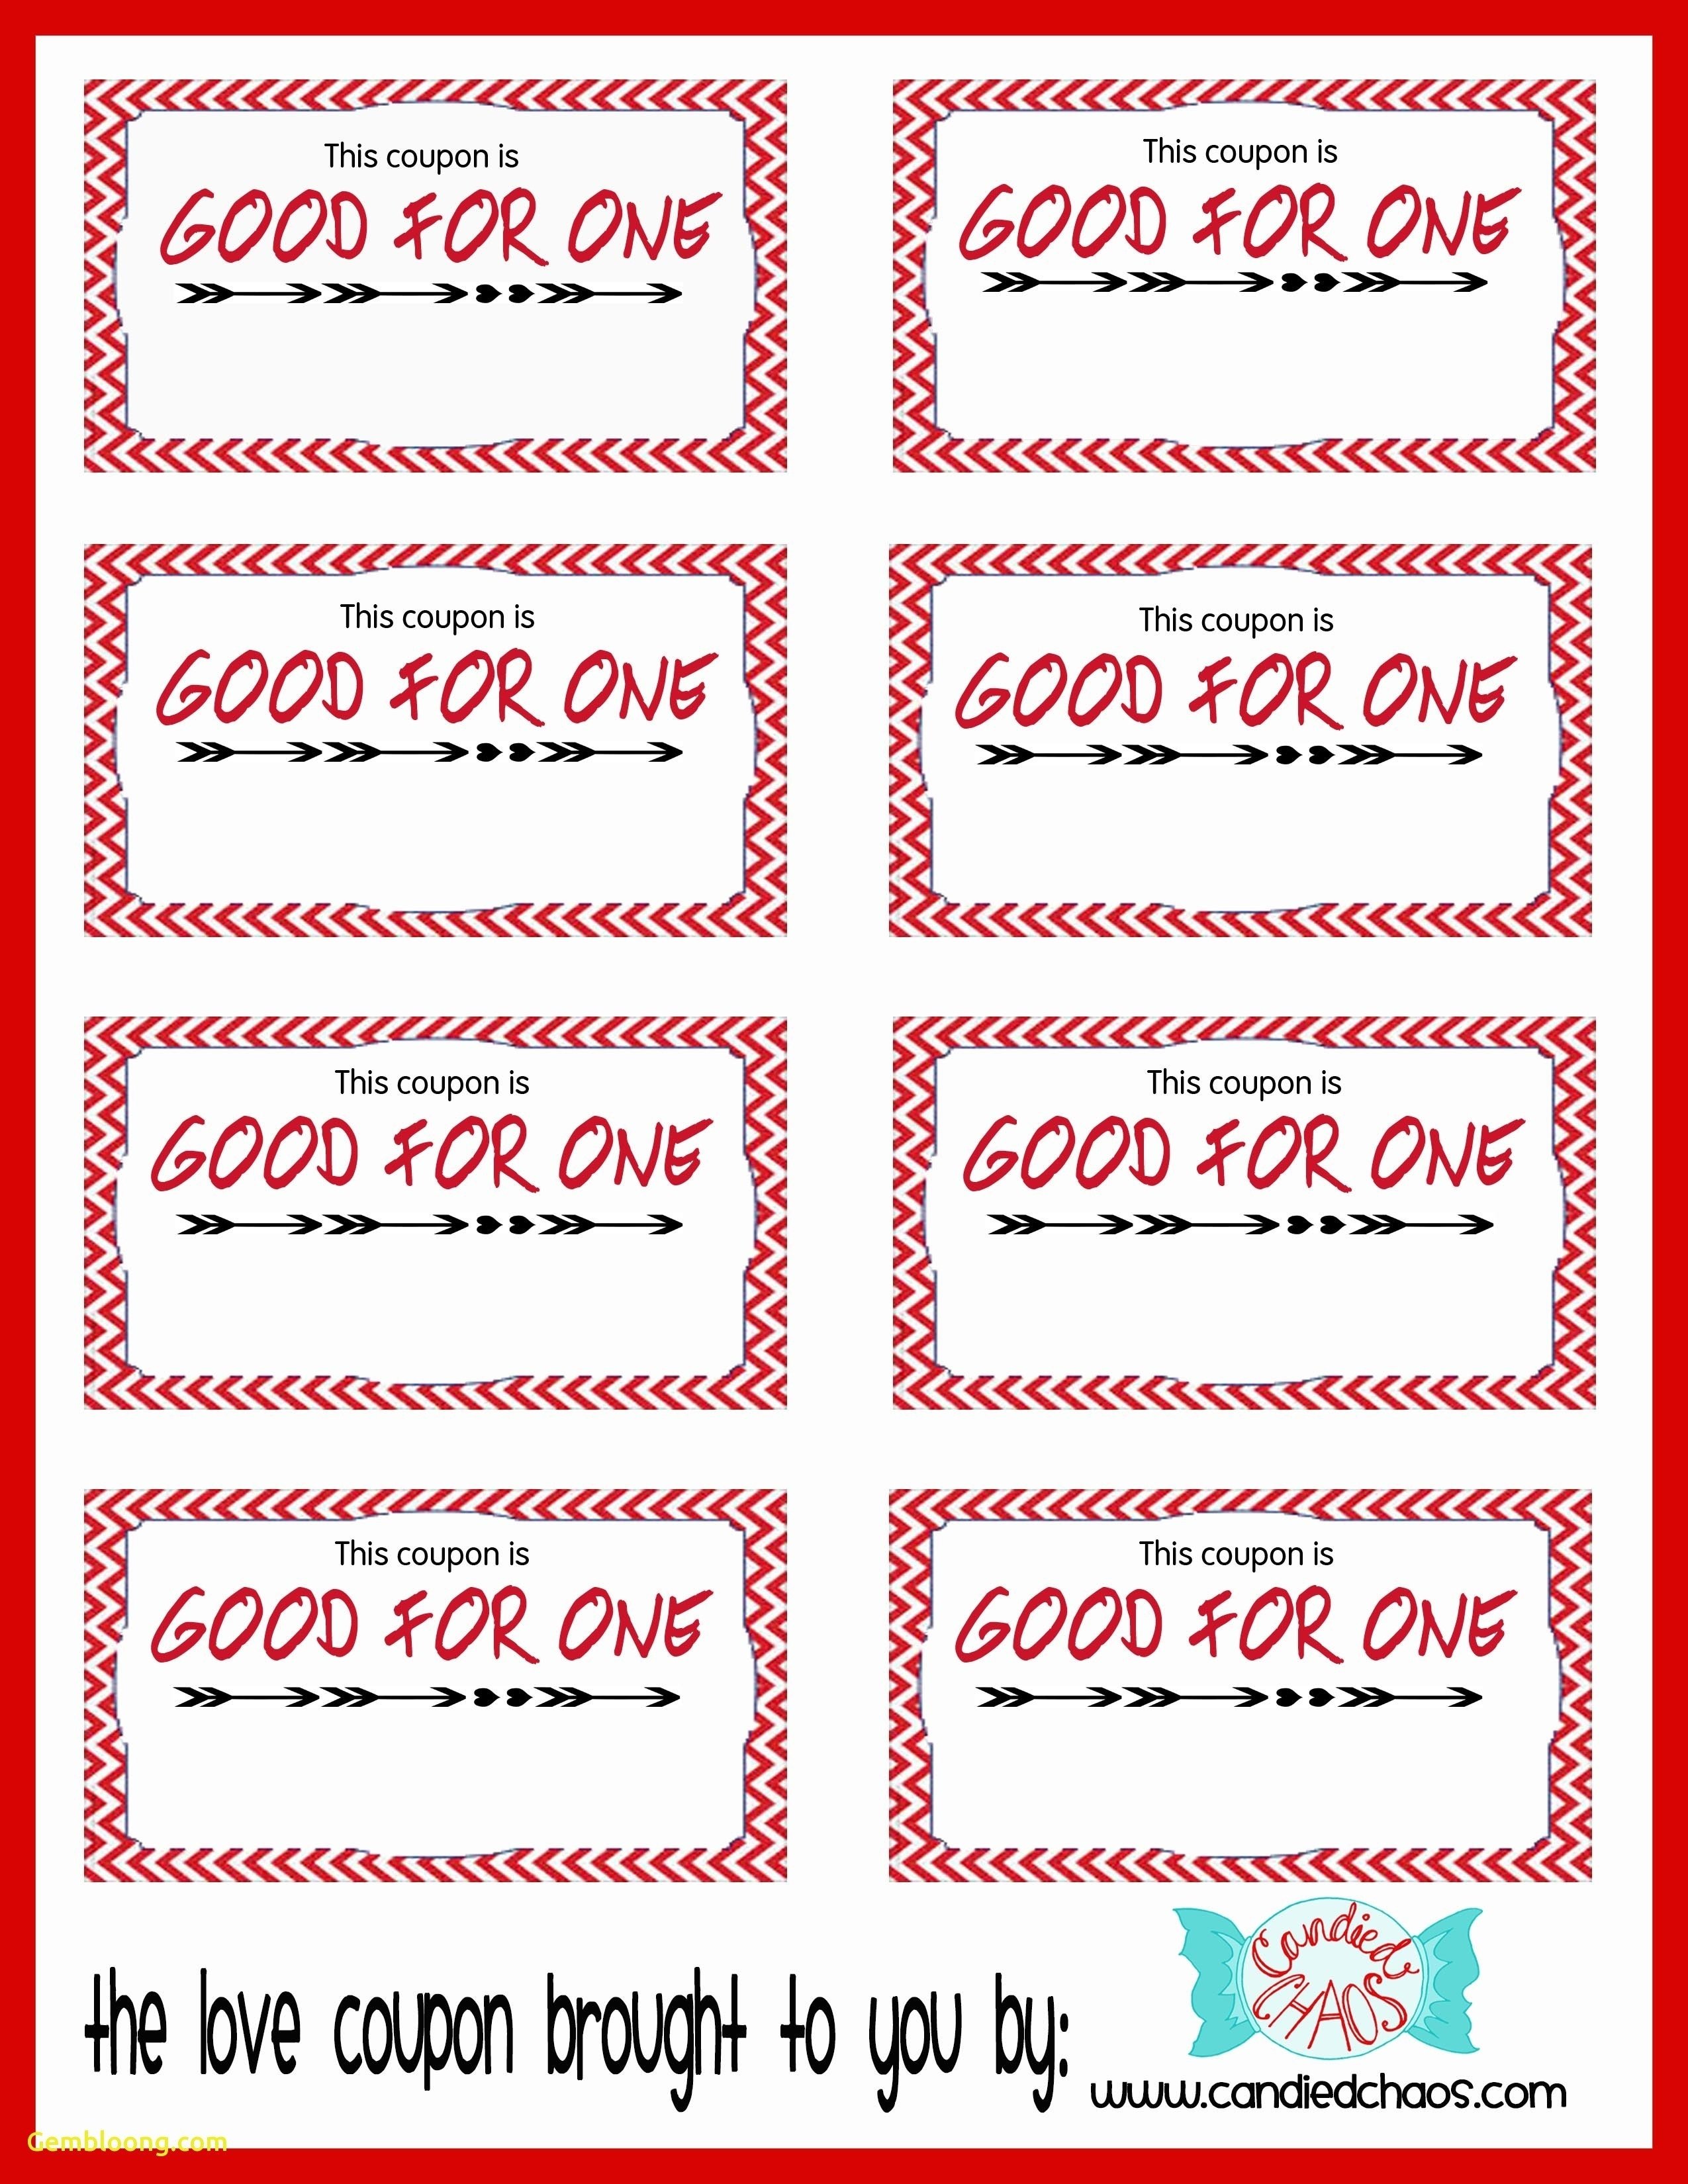 10 Beautiful Naughty Coupon Ideas For Boyfriend printable coupon template generous boyfriend coupon template gallery 2022